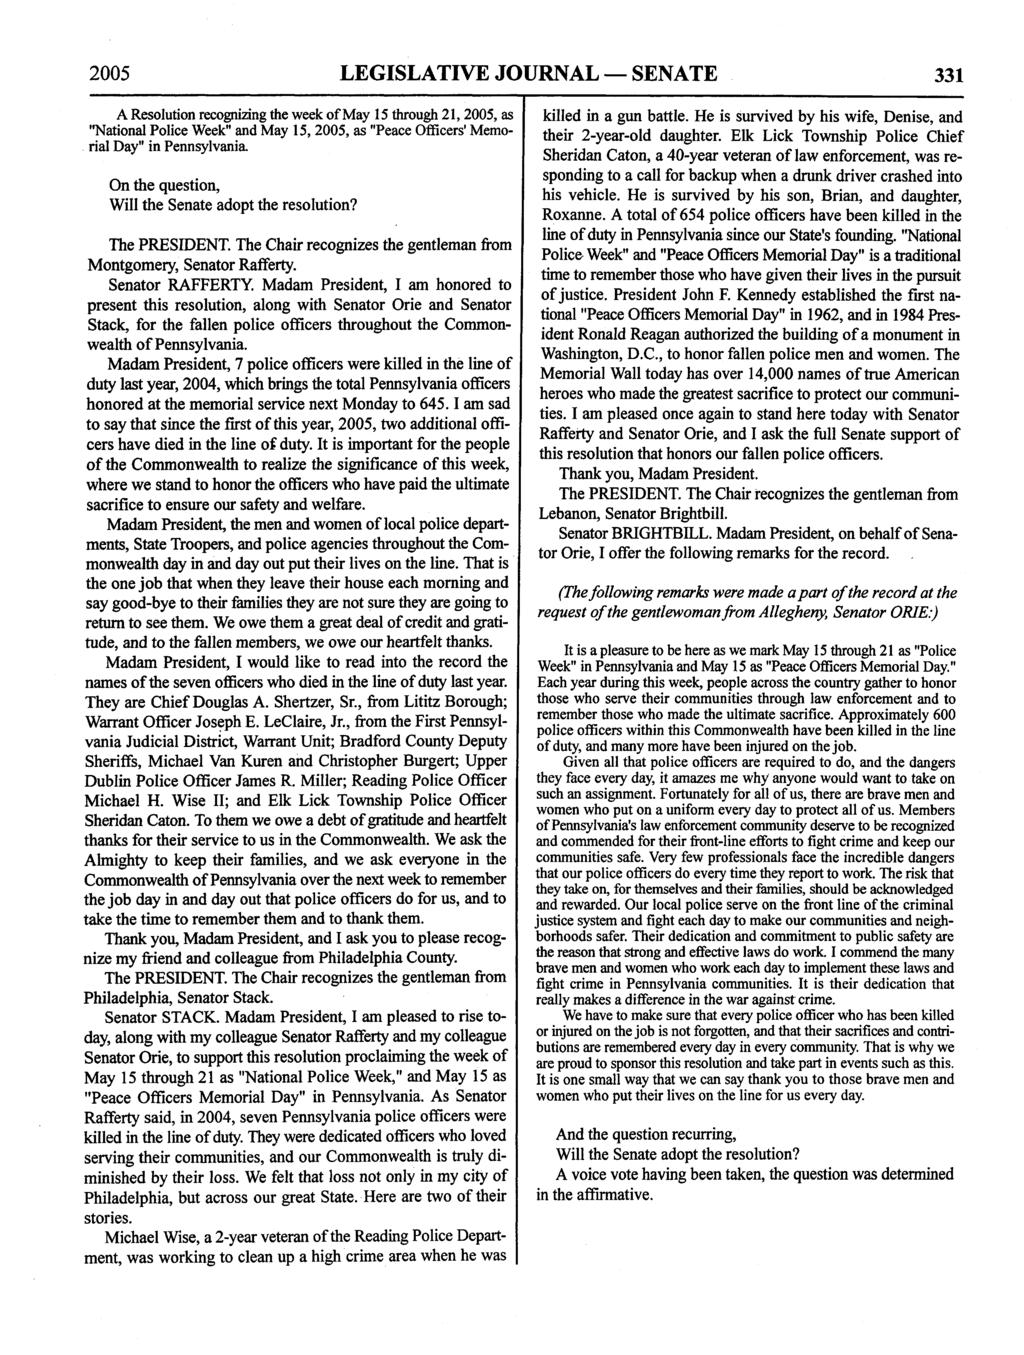 2005 LEGISLATIVE JOURNAL SENATE 331 A Resolution recognizing the week of May 15 through 21, 2005, as "National Police Week" and May 15, 2005, as "Peace Officers' Memorial Day" in Pennsylvania.